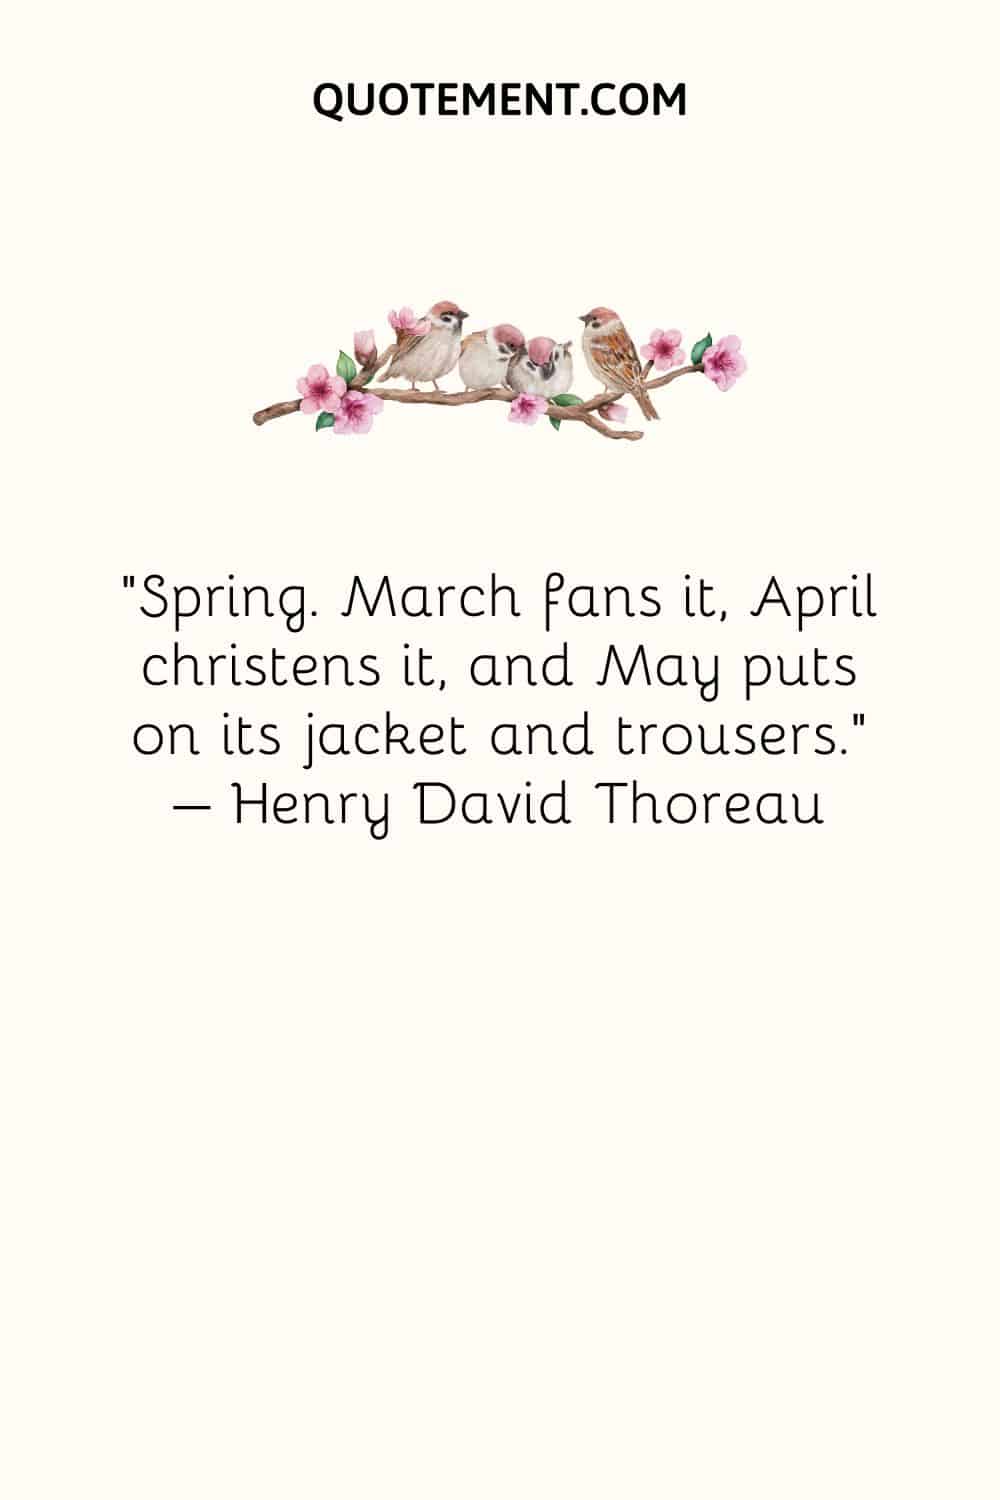 Spring. March fans it, April christens it, and May puts on its jacket and trousers.